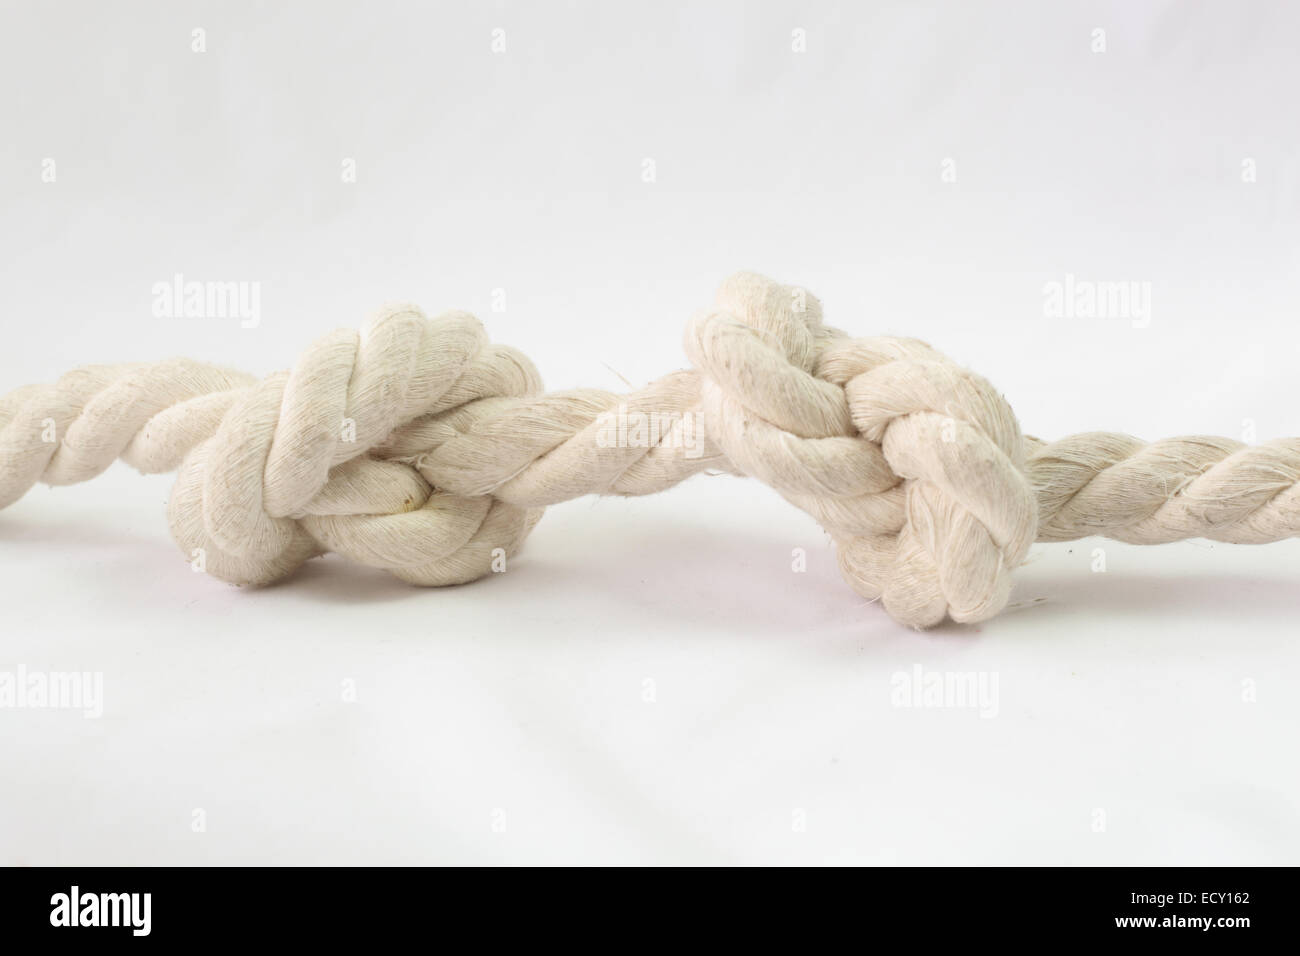 another side of multiple figure-eight knot tied on thick jute rope